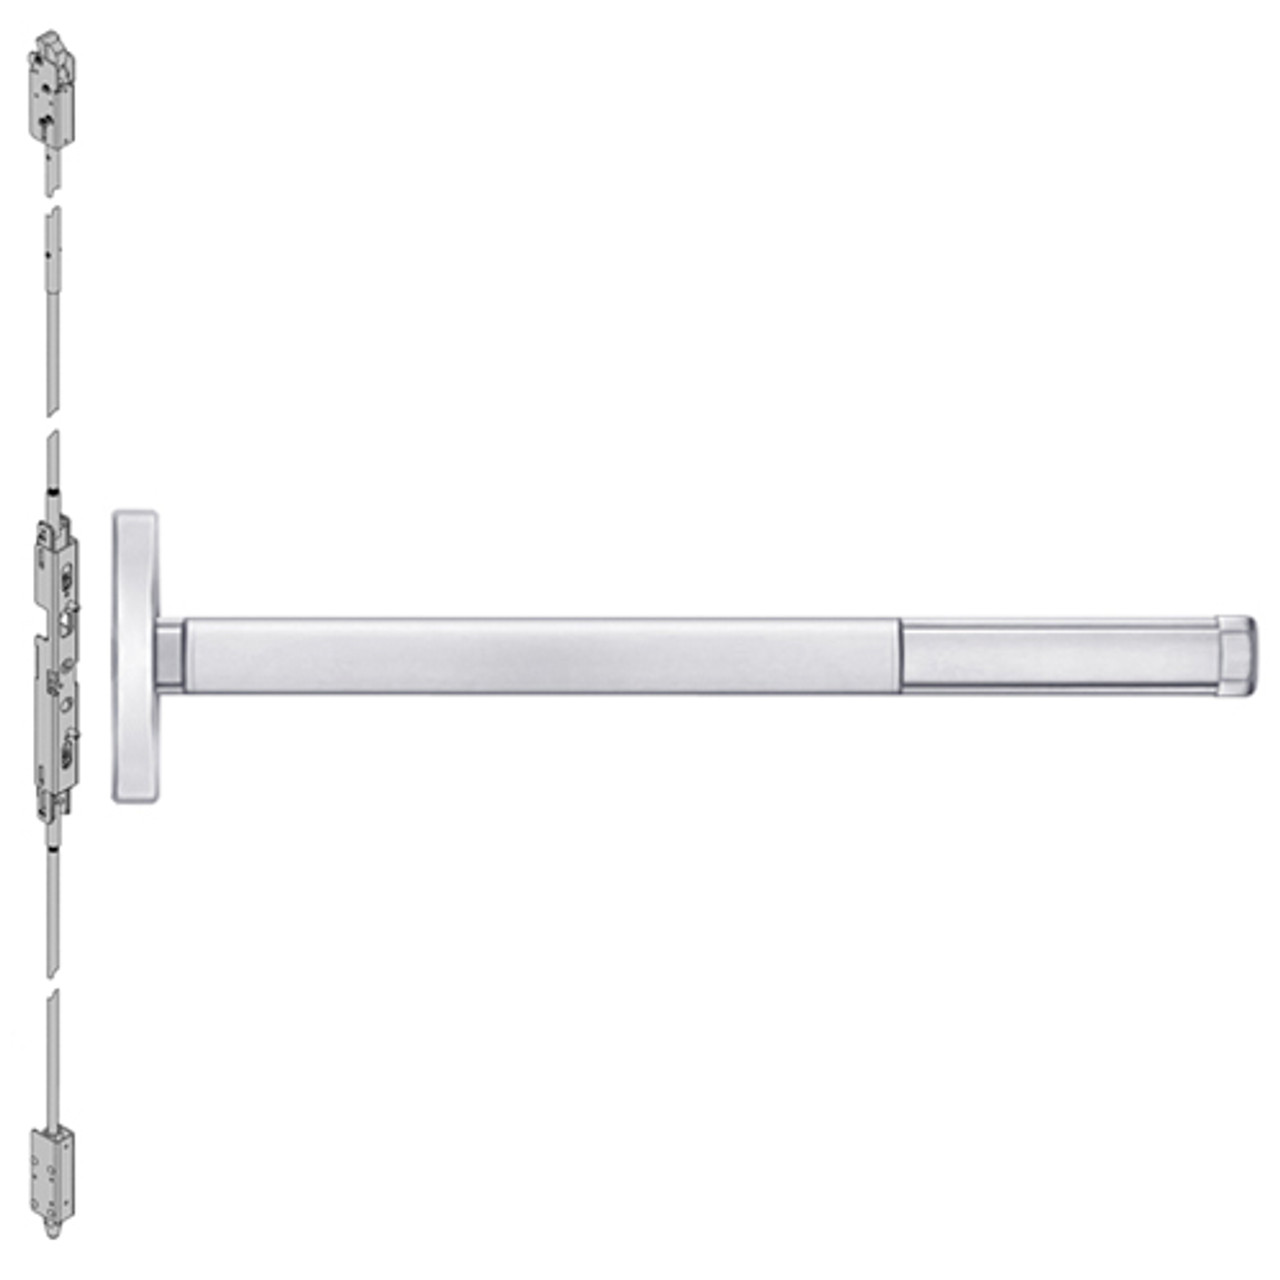 2614LBRCD-625-48 PHI 2600 Series Non Fire Rated Concealed Vertical Rod Exit Device Prepped for Lever Always Active with Cylinder Dogging and LBR in Bright Chrome Finish